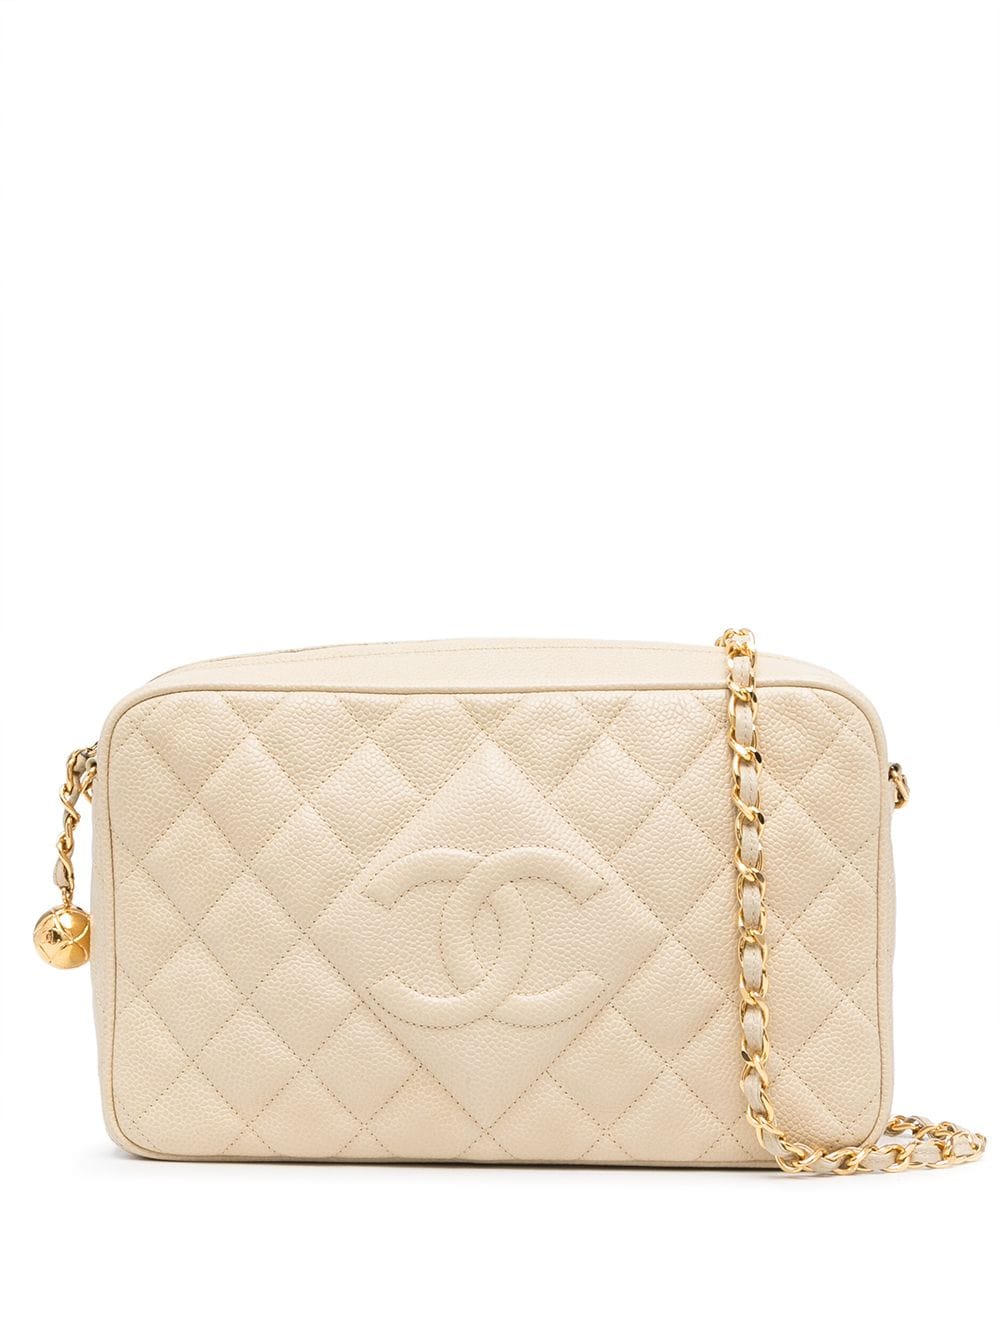 CHANEL Pre-Owned 1995 Diamond Quilted CC Camera Bag - Farfetch